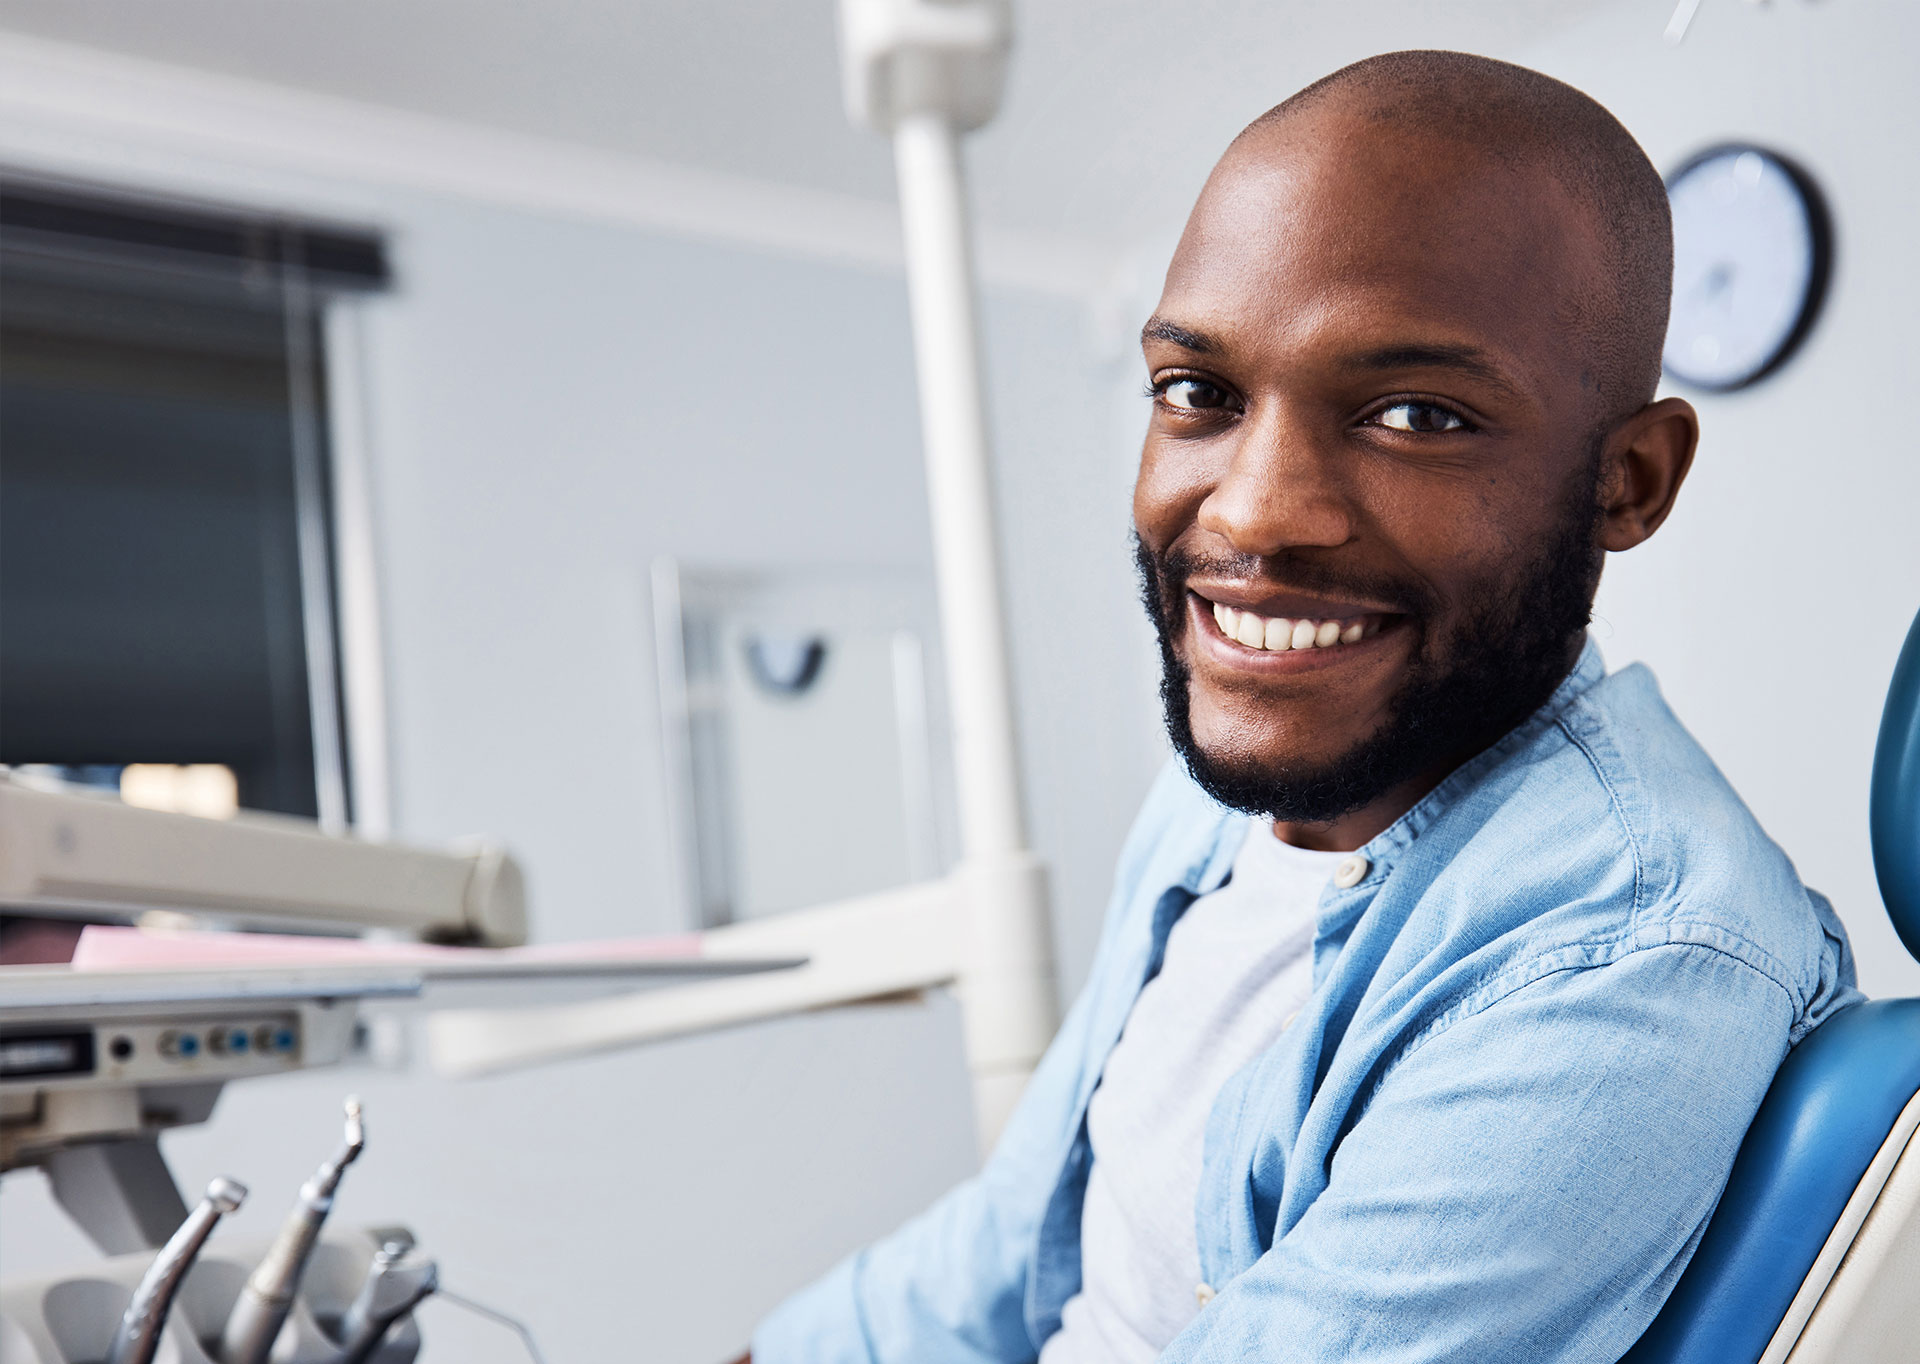 A man, possibly a dental professional, is smiling and sitting in front of a dental chair.